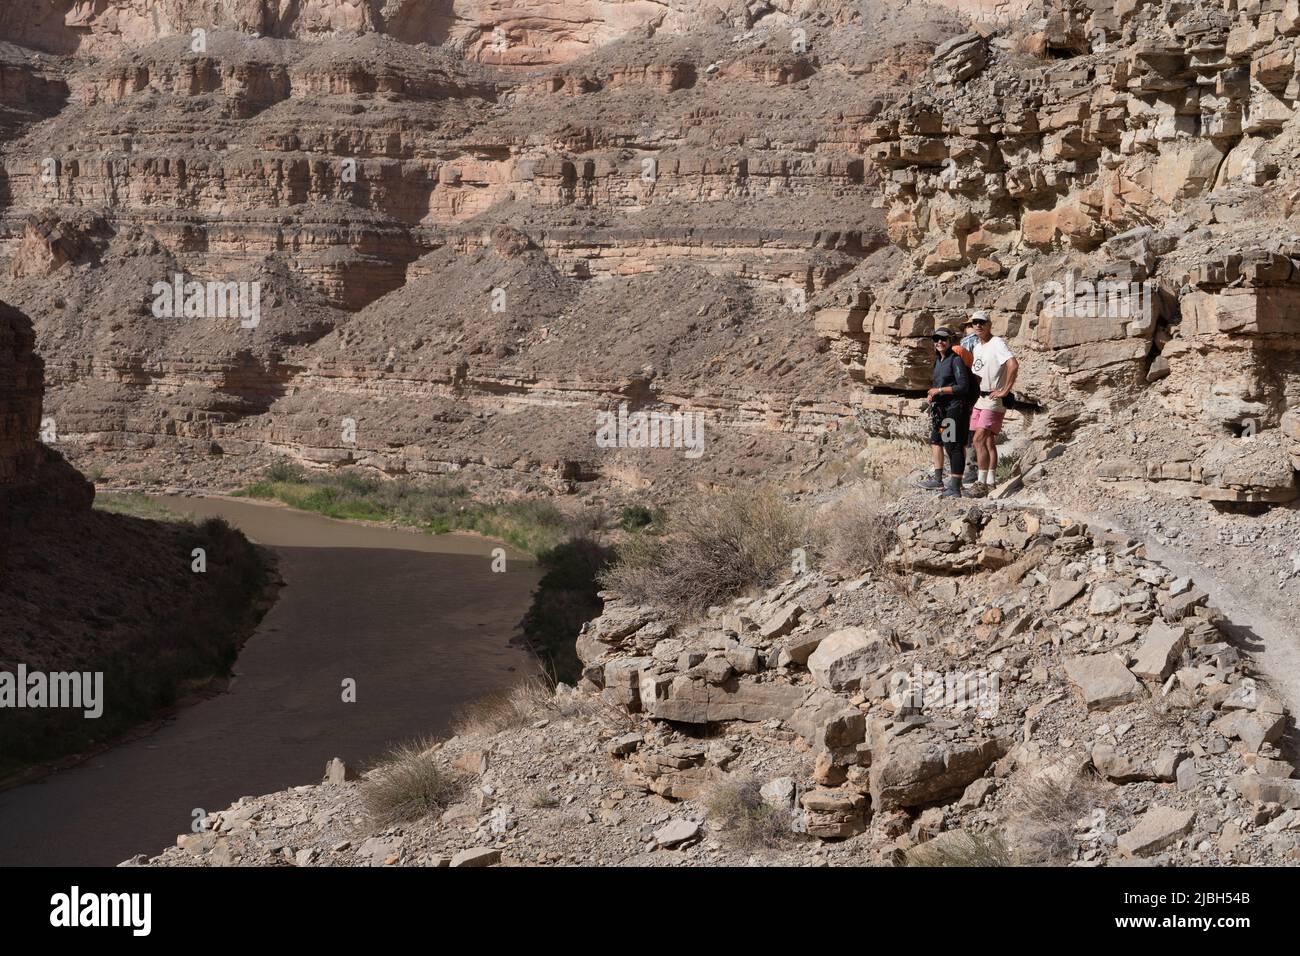 River explorers and tourists climb the steep walls along the San Juan River canyon in southwest Utah. Stock Photo